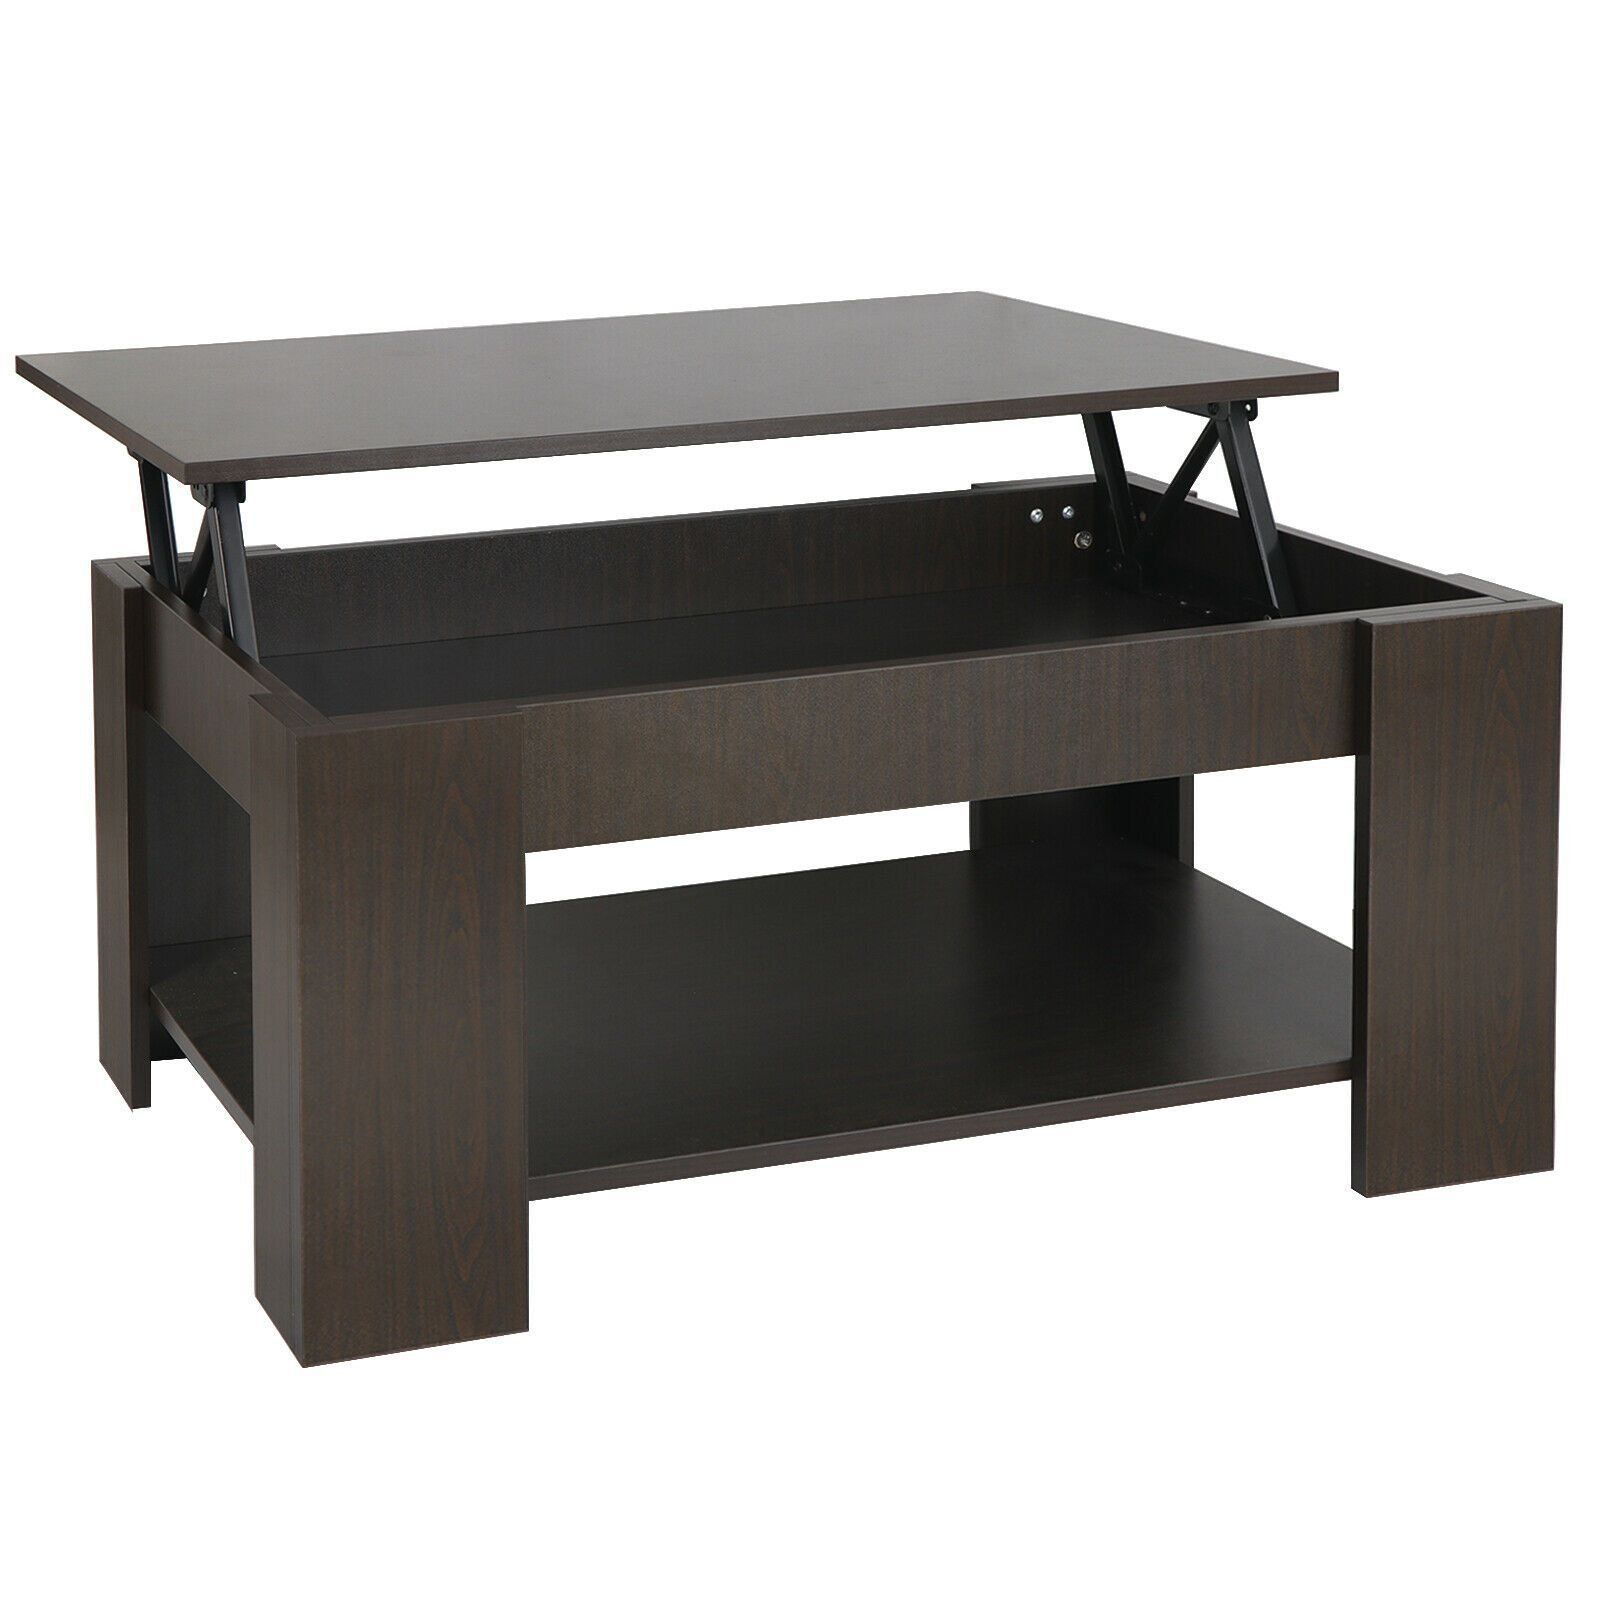 Modern Lift Up Top Tea Coffee Table Hidden Storage Compartment & Shelf Within Modern Coffee Tables With Hidden Storage Compartments (View 15 of 20)